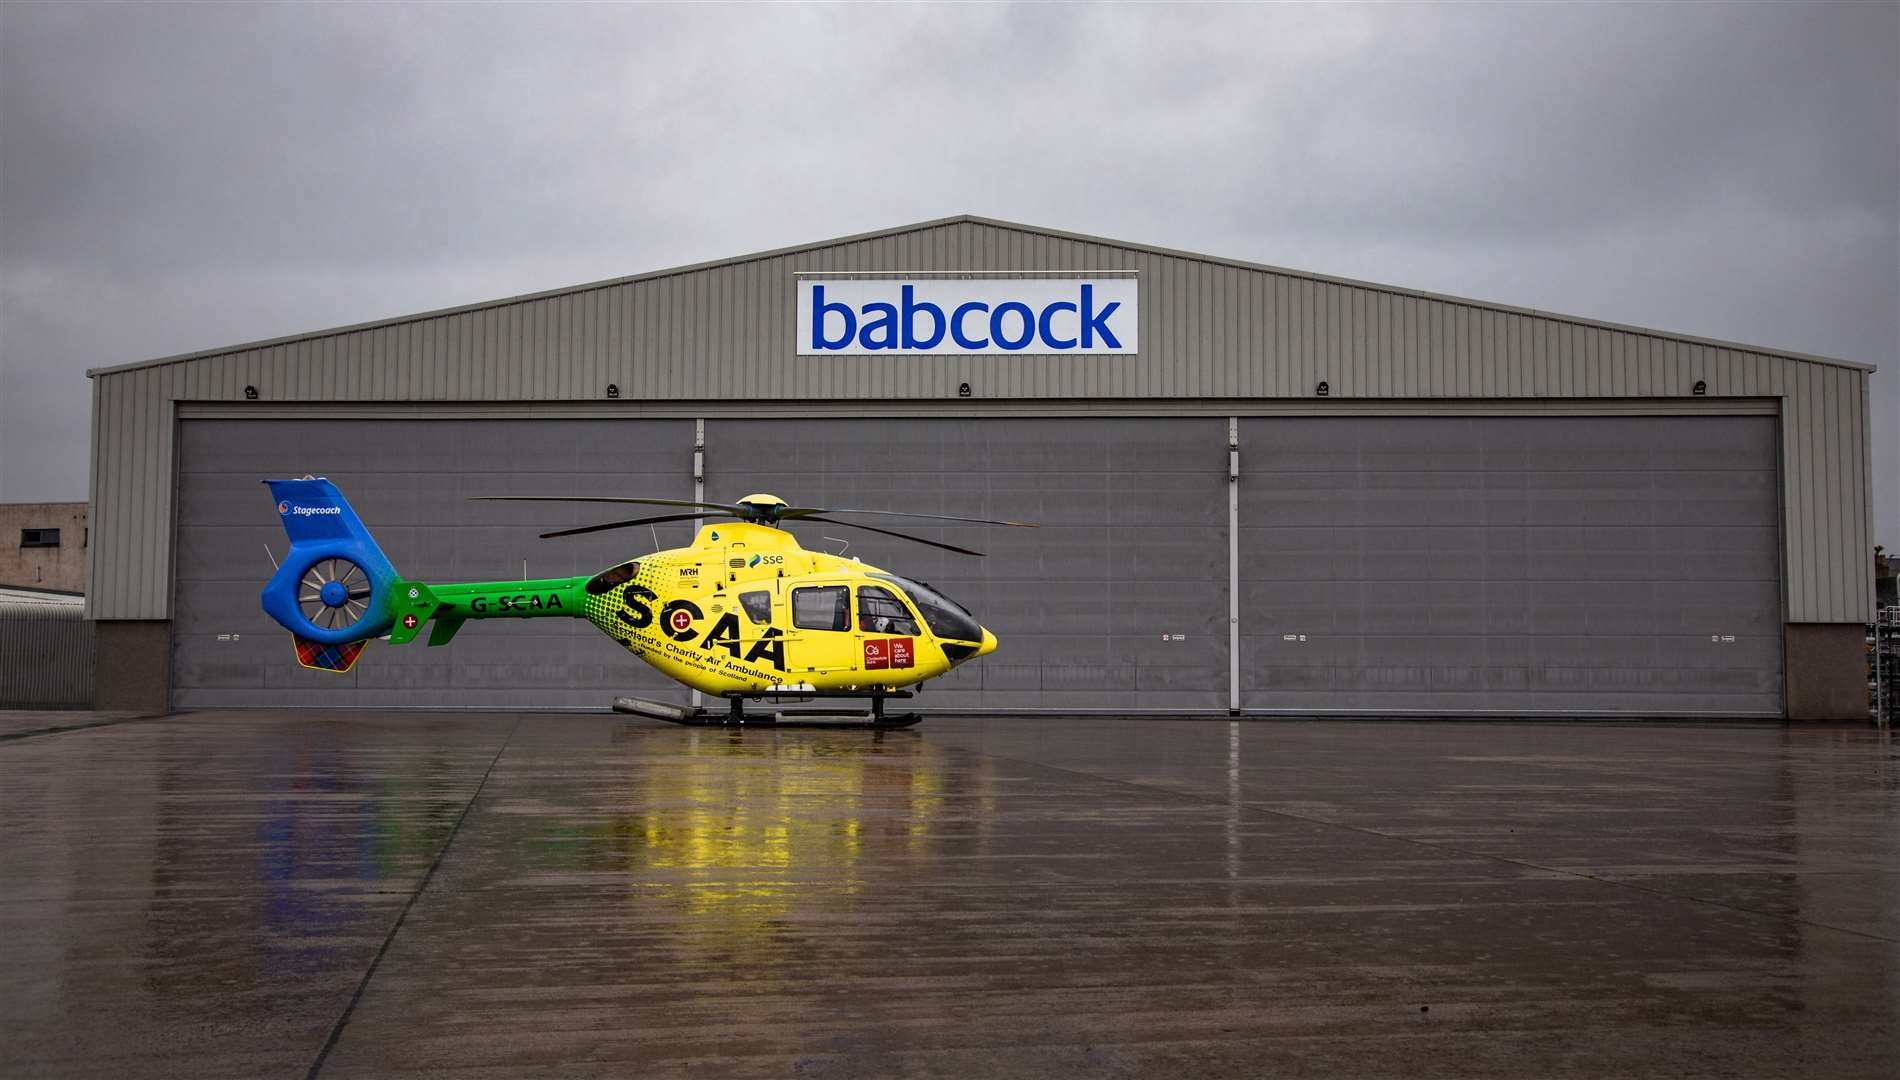 The new Helimed 79 is set to be based at Aberdeen Airport from a new dedicated facility offering cover for the north-east and will be based next to the existing Babcock facility.